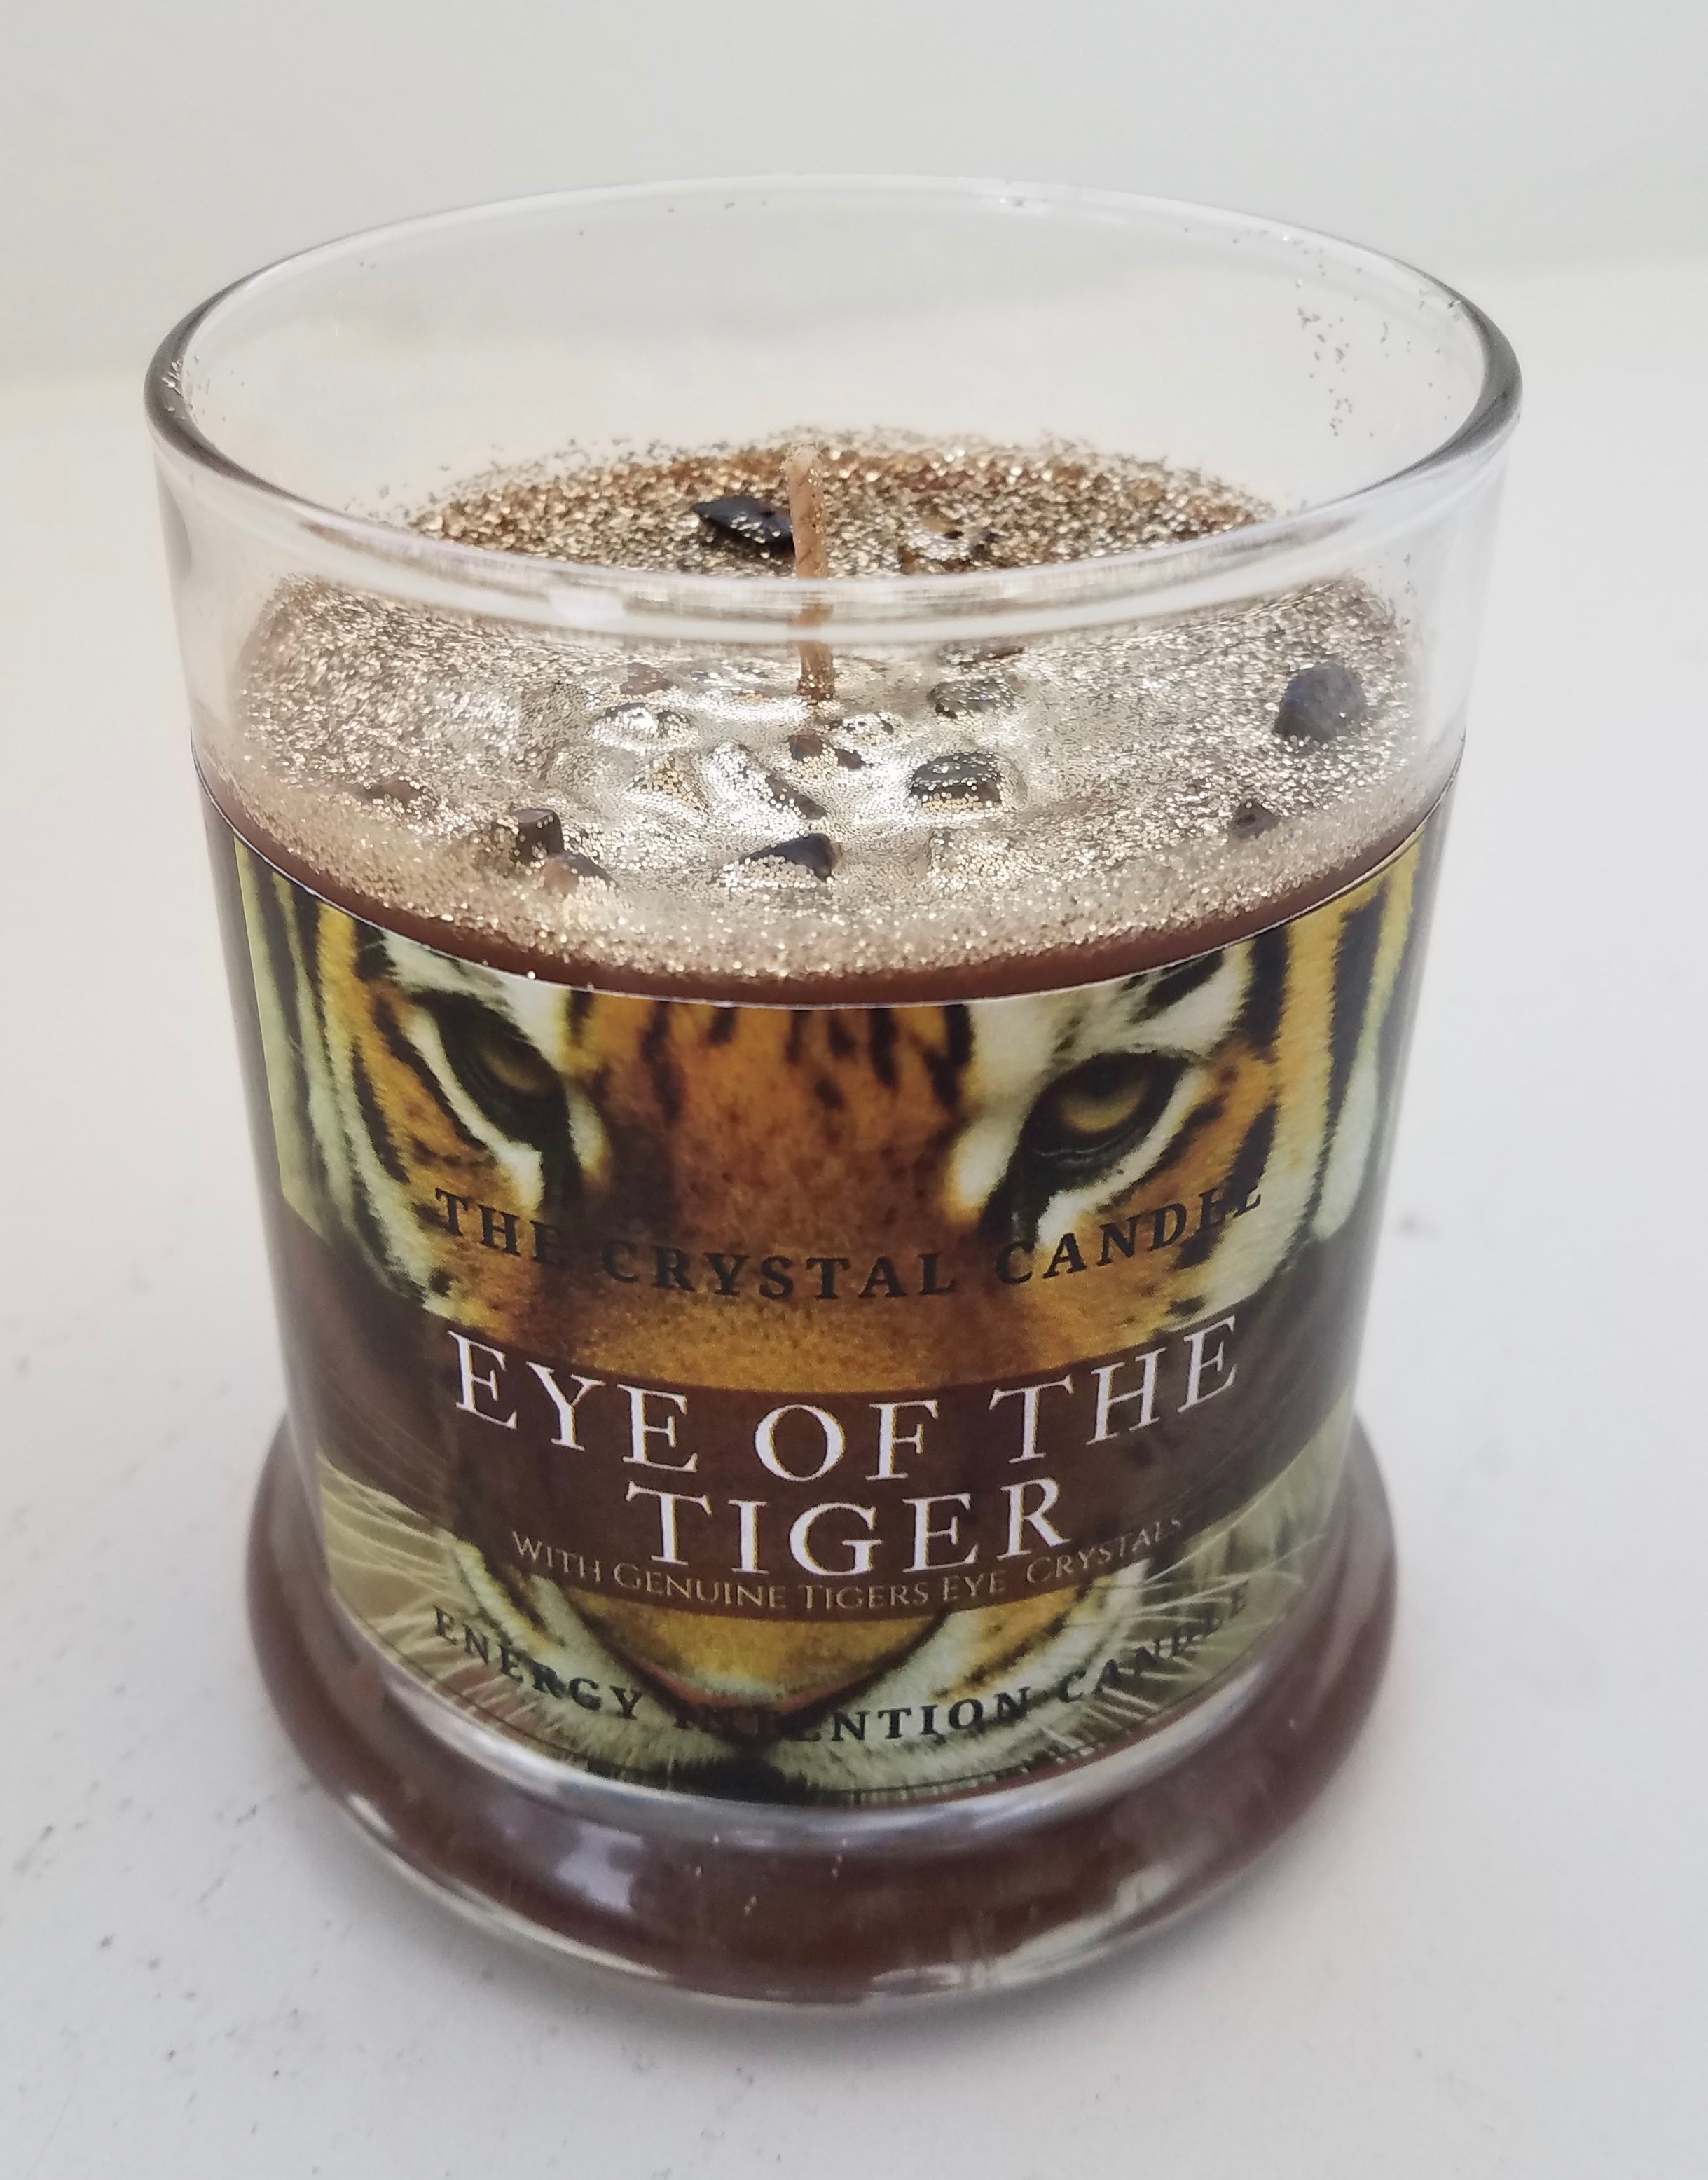 Eye Of The Tiger-Tiger's Eye Candle For Motivation Courage And Prosperity